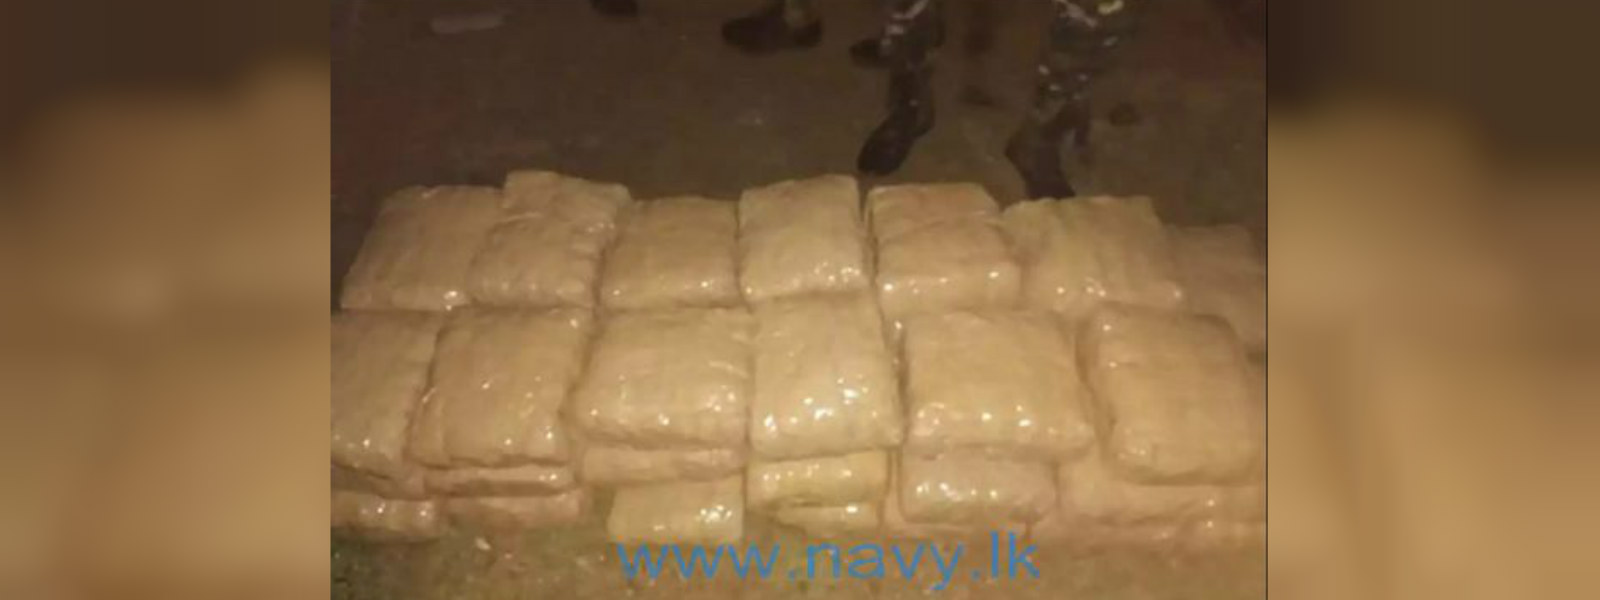 Navy arrests man with 83kg of Kerala Cannabis